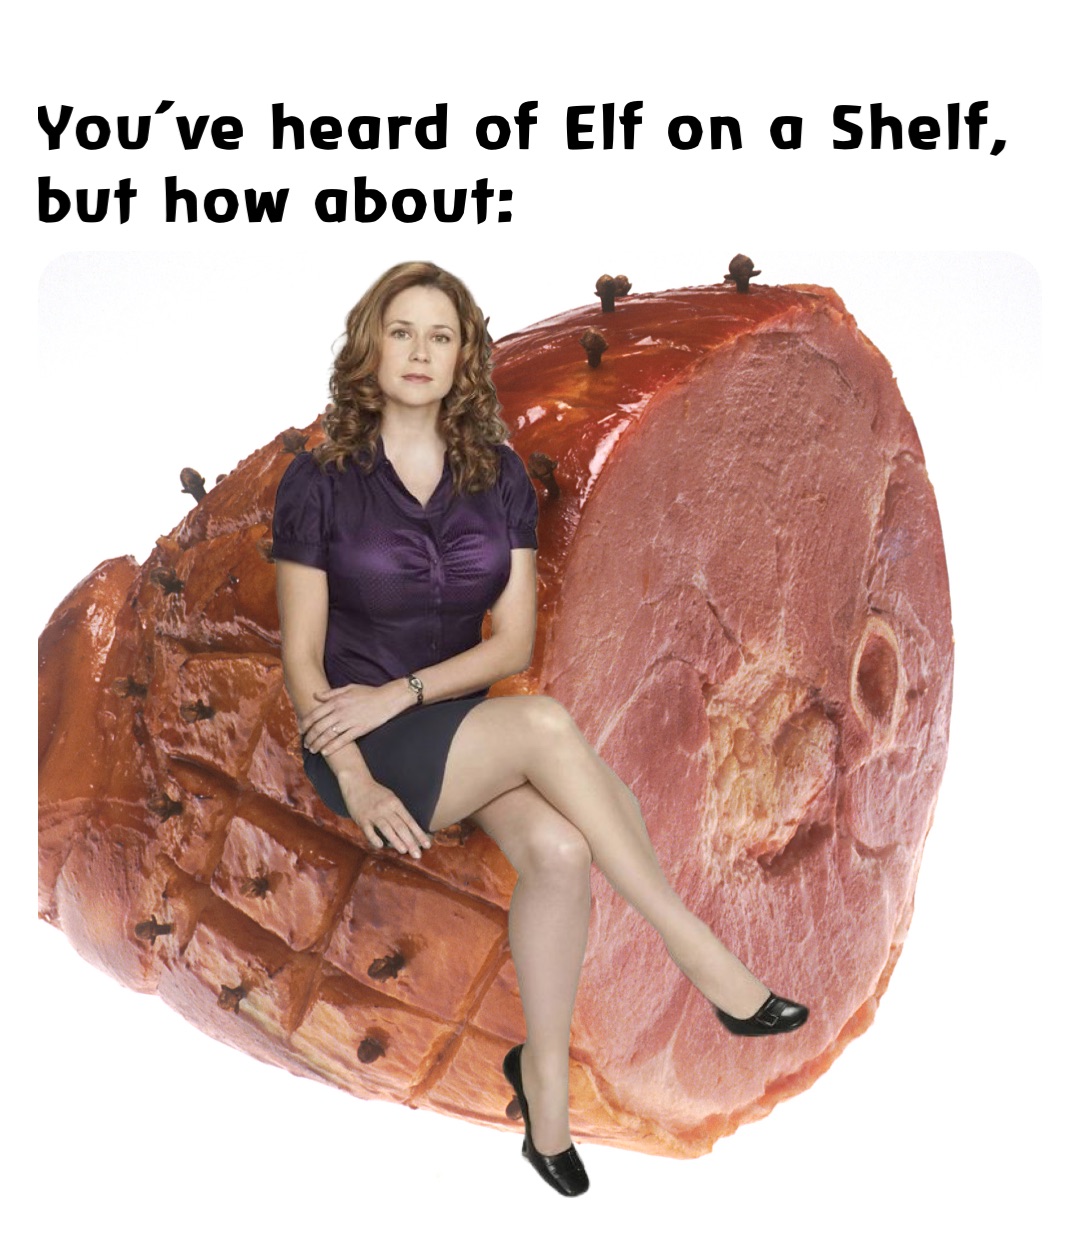 You’ve heard of Elf on a Shelf, but how about: